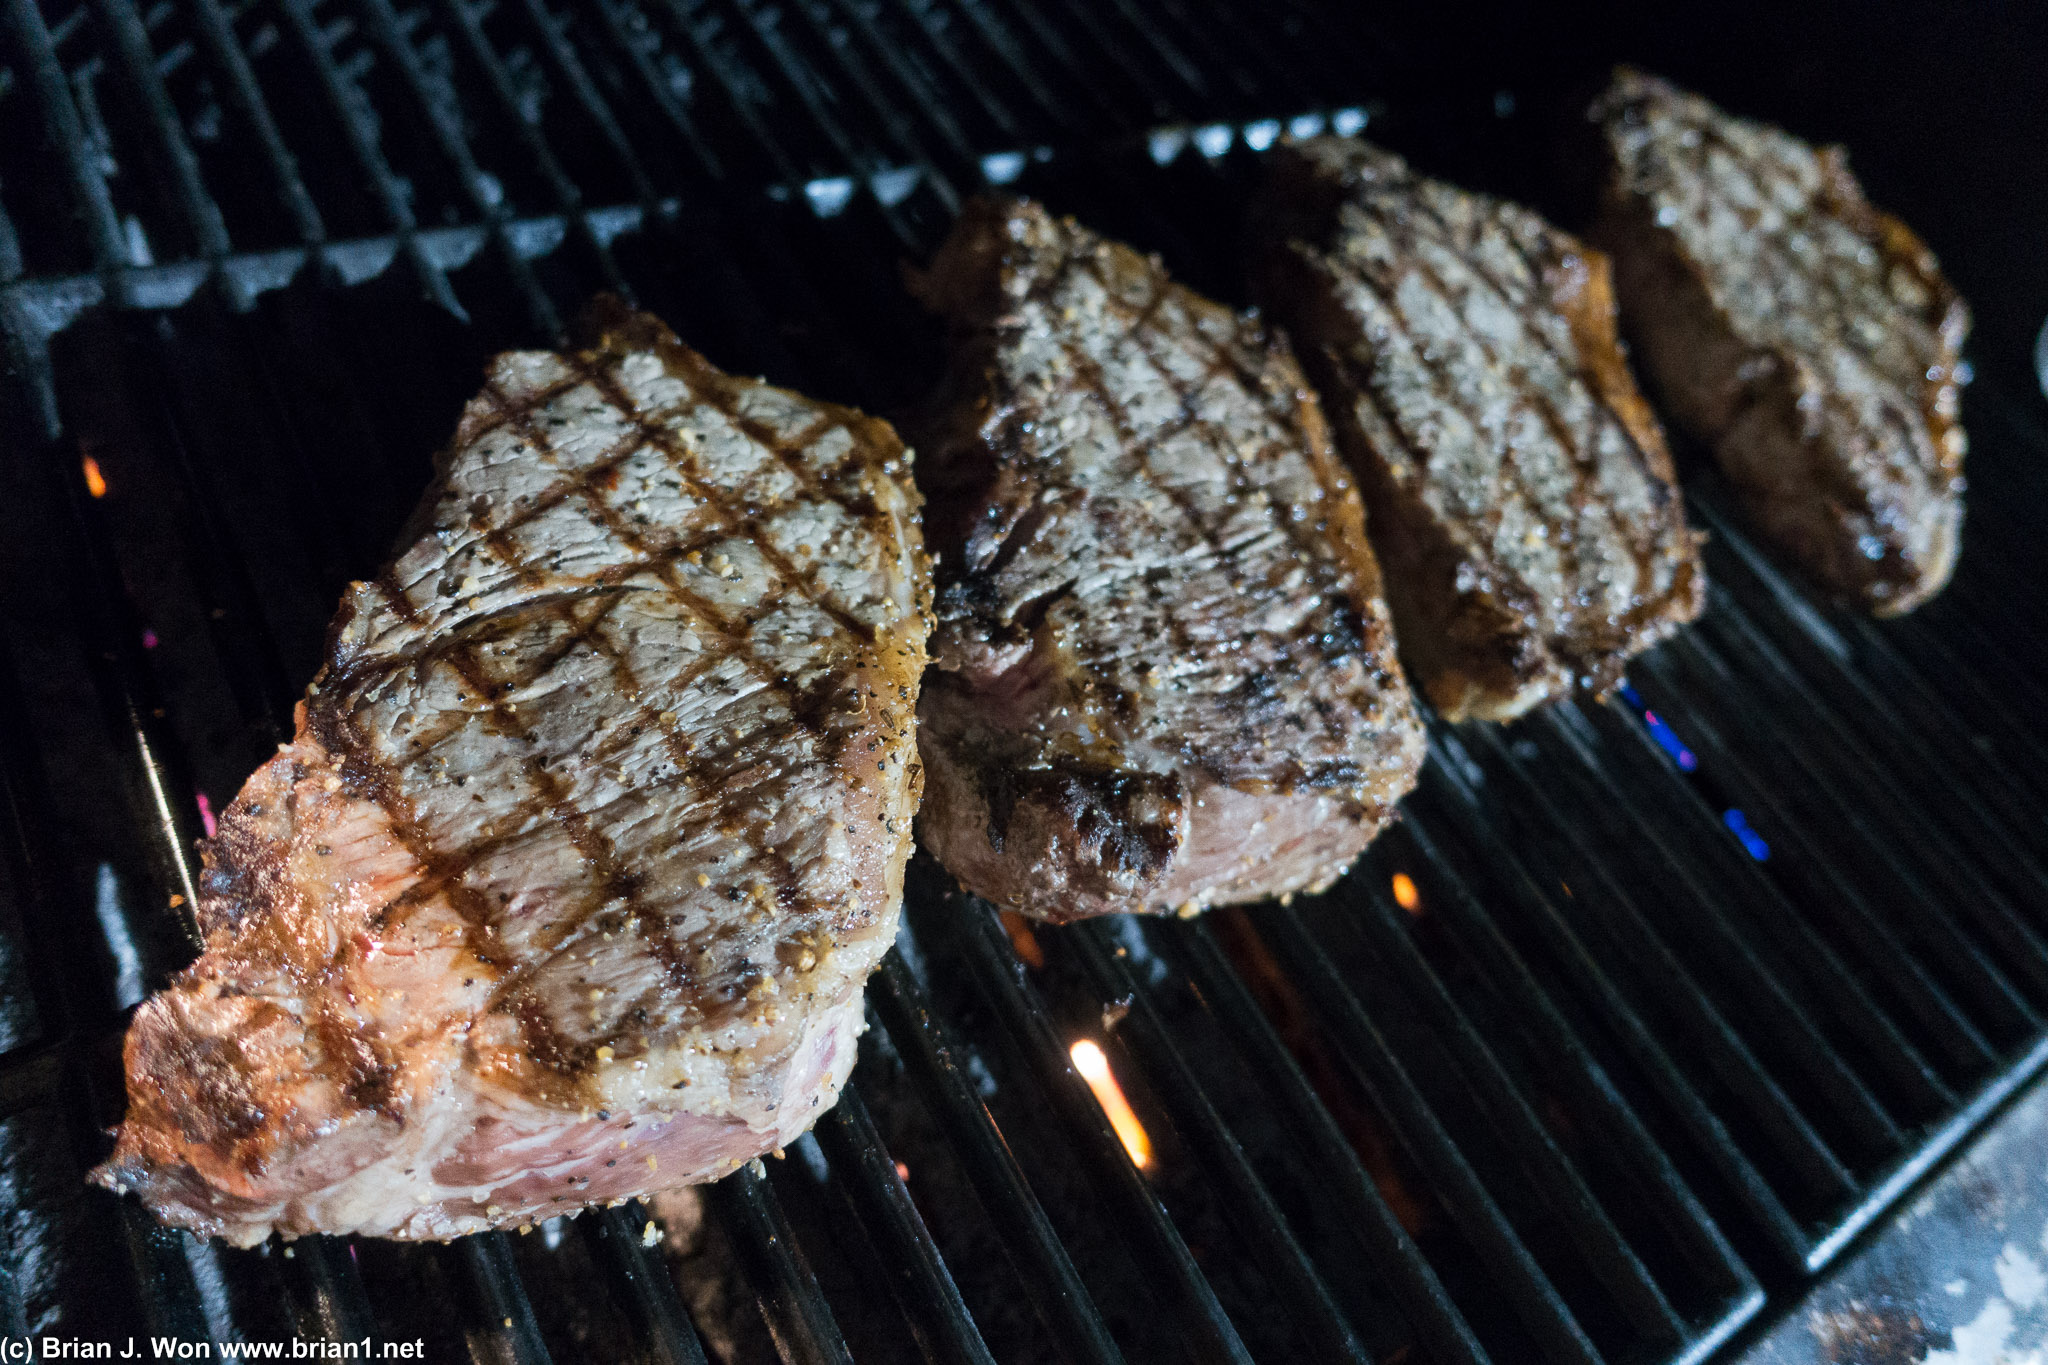 Time to fire up the grill.